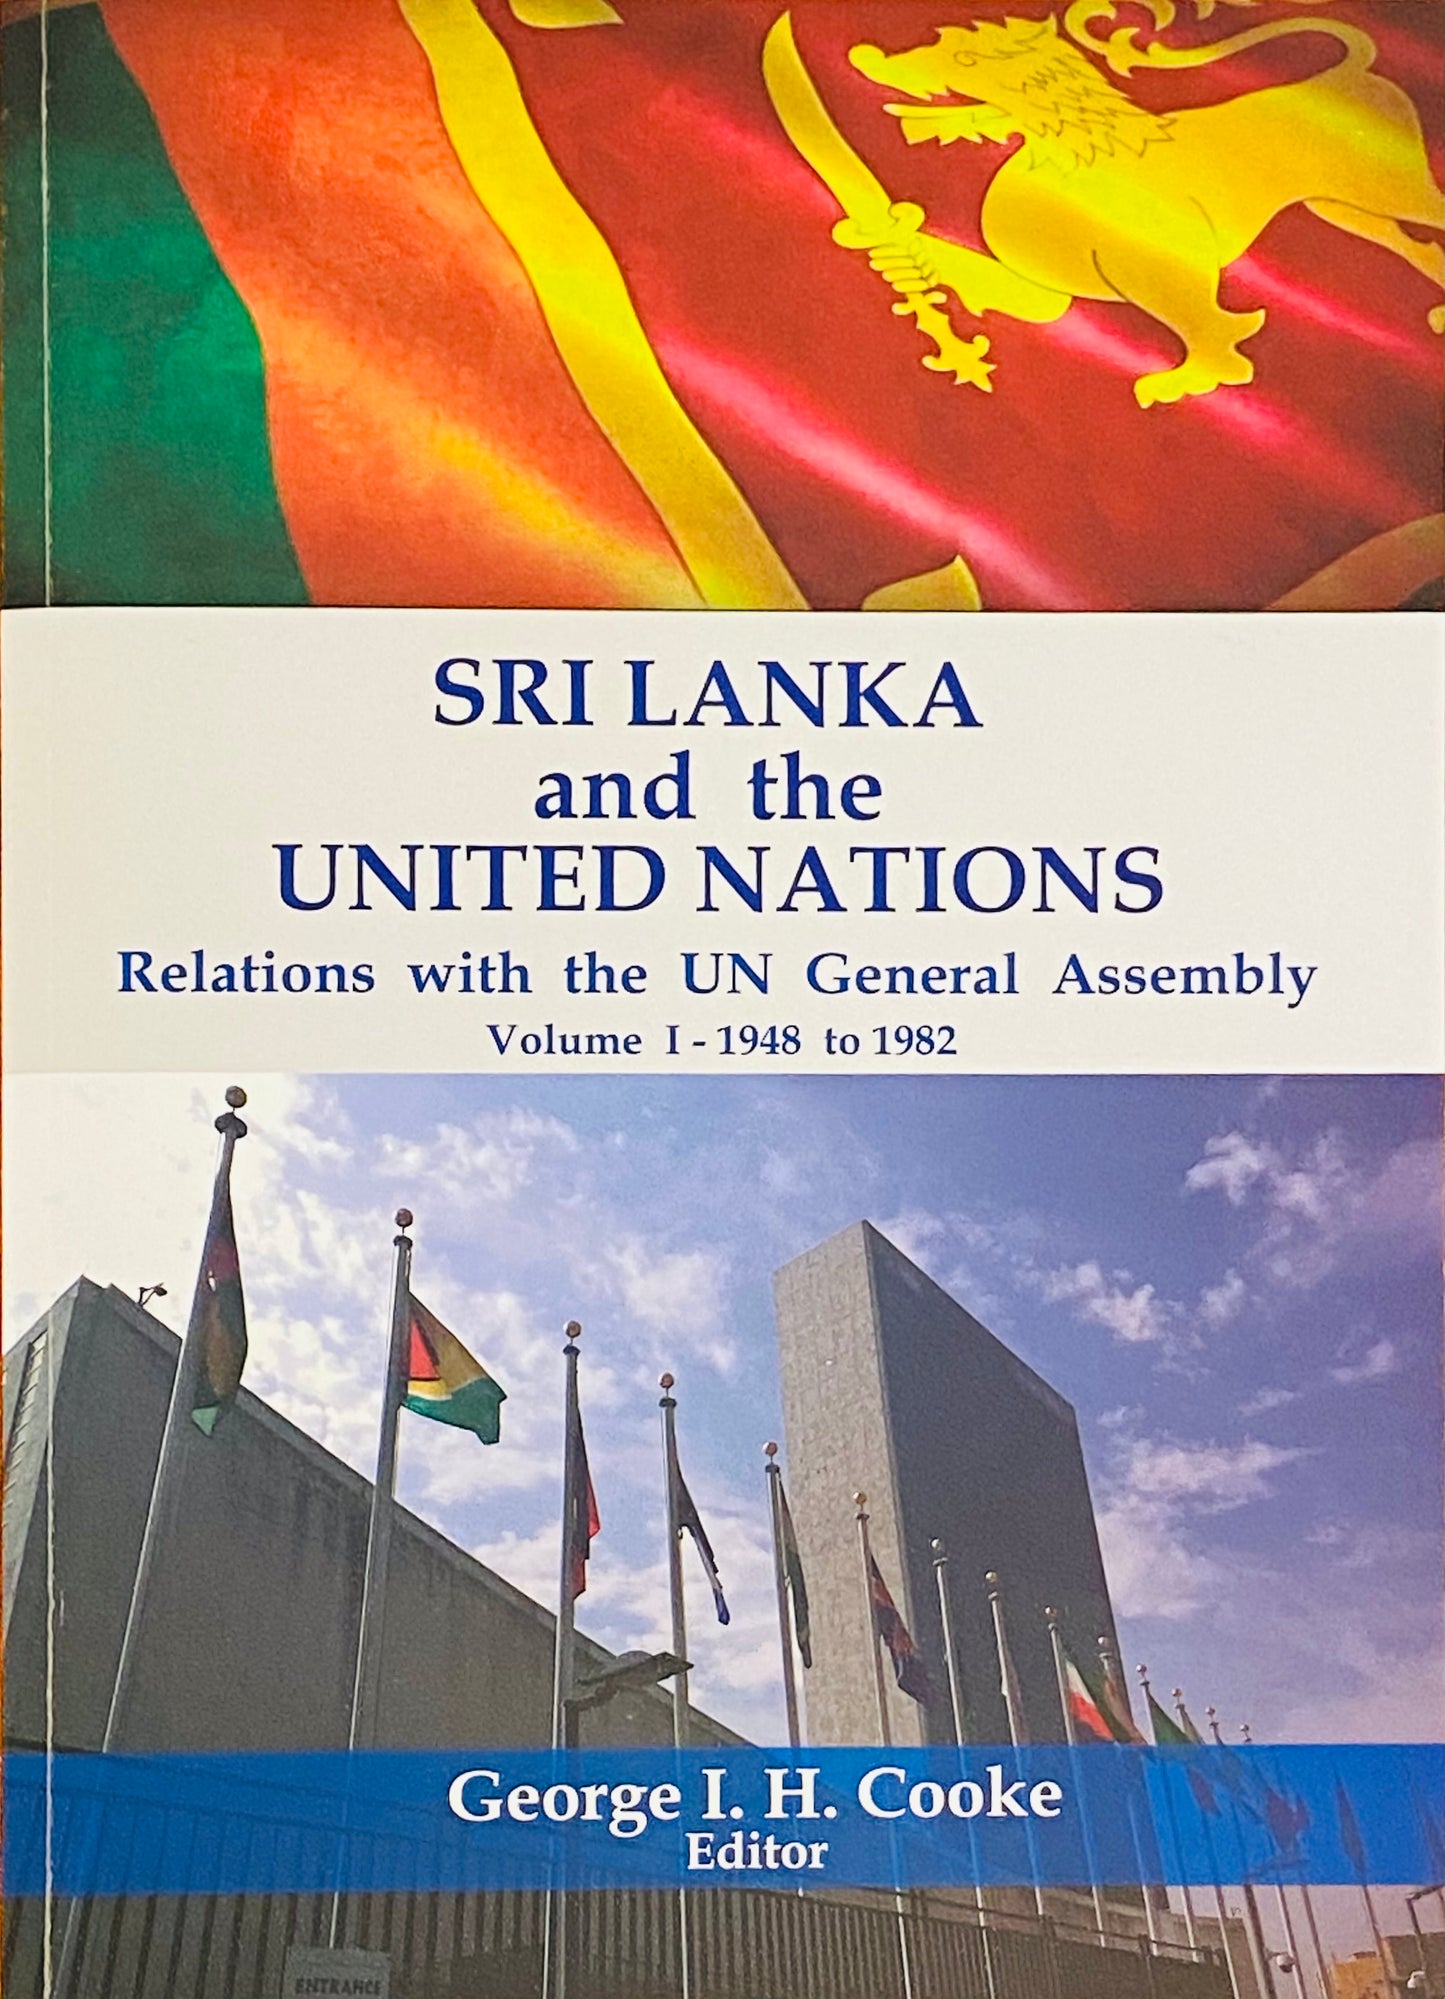 Sri Lanka & the United Nations:  Relations with the UN General Assembly, Volume I - 1948 to 1982 by George I. H. Cooke